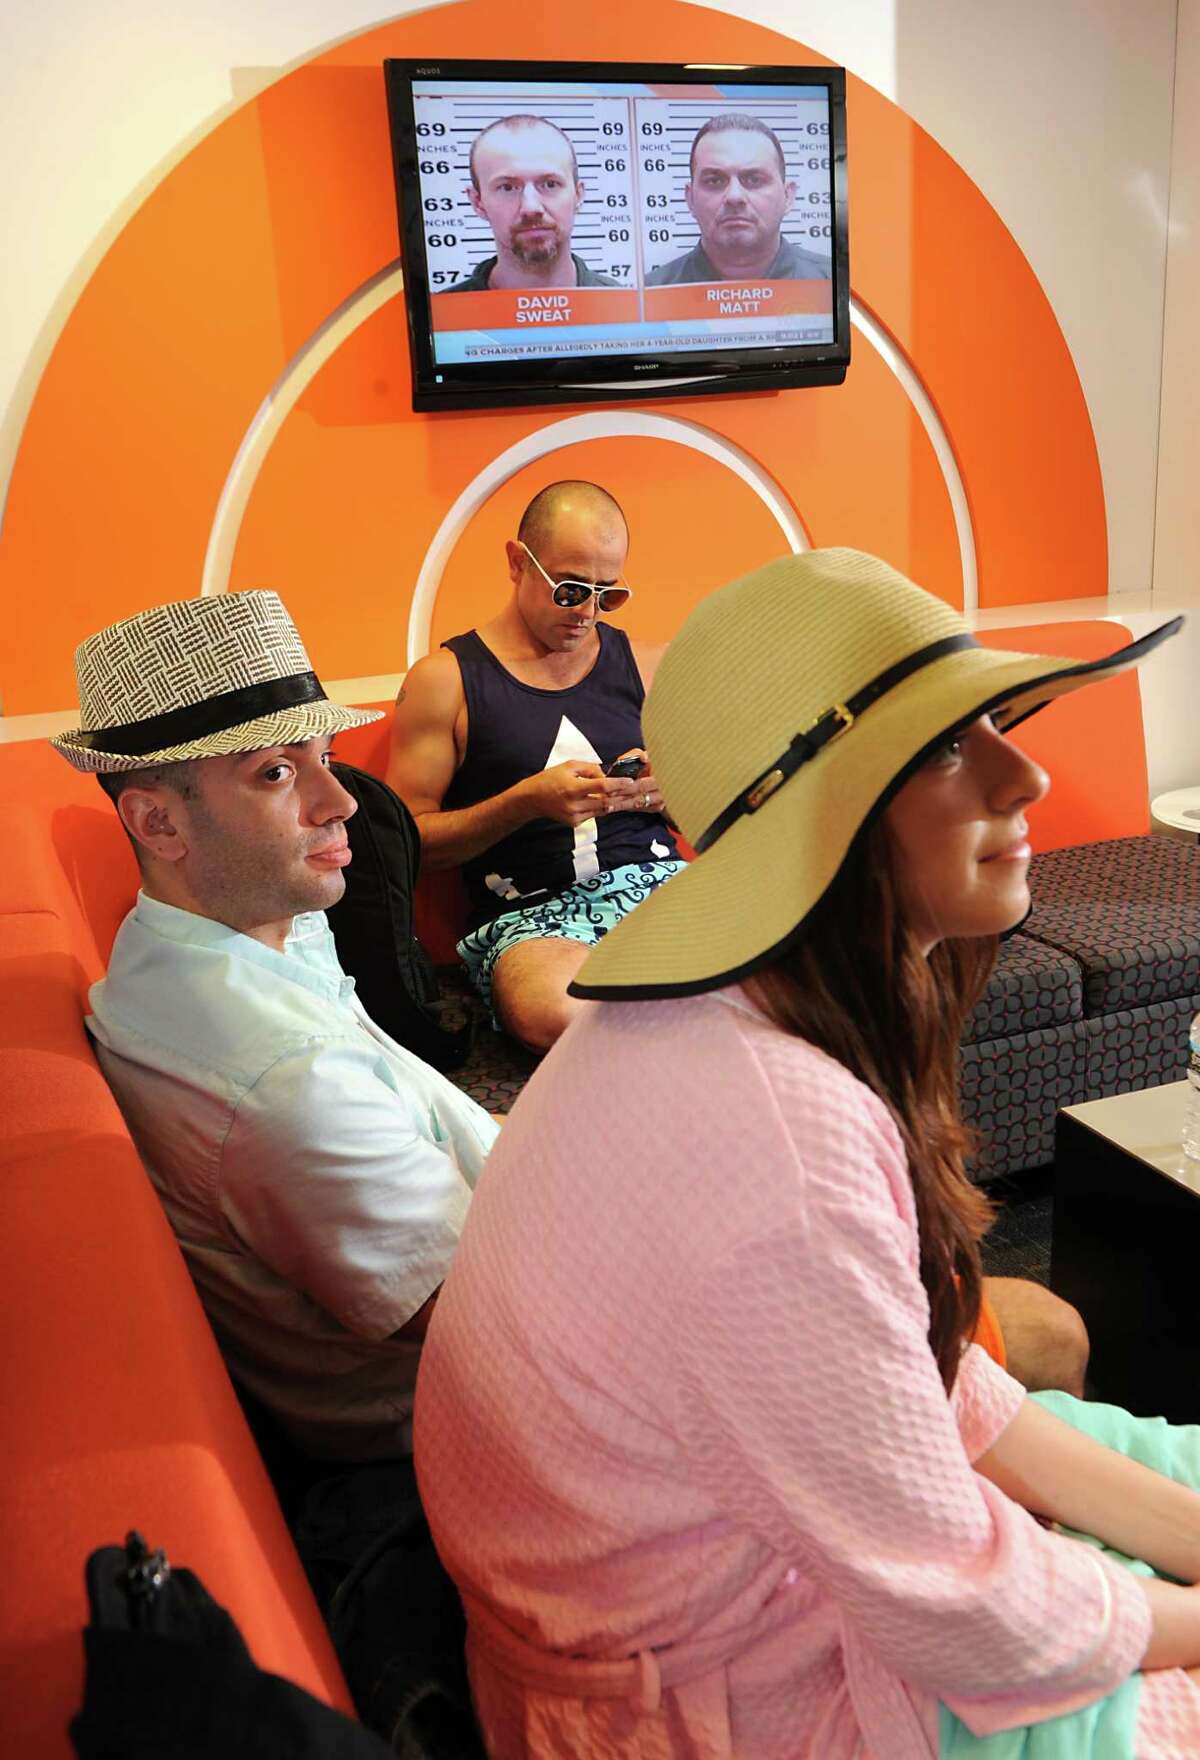 Models Ashely Veley of Clifton Park, right, Daniel Weiss of Clifton Park, left, and Frank Dianda of Hudson wait in the green room before appearing on The Today Show on Wednesday, June 10, 2015 in New York, N.Y. (Lori Van Buren / Times Union)